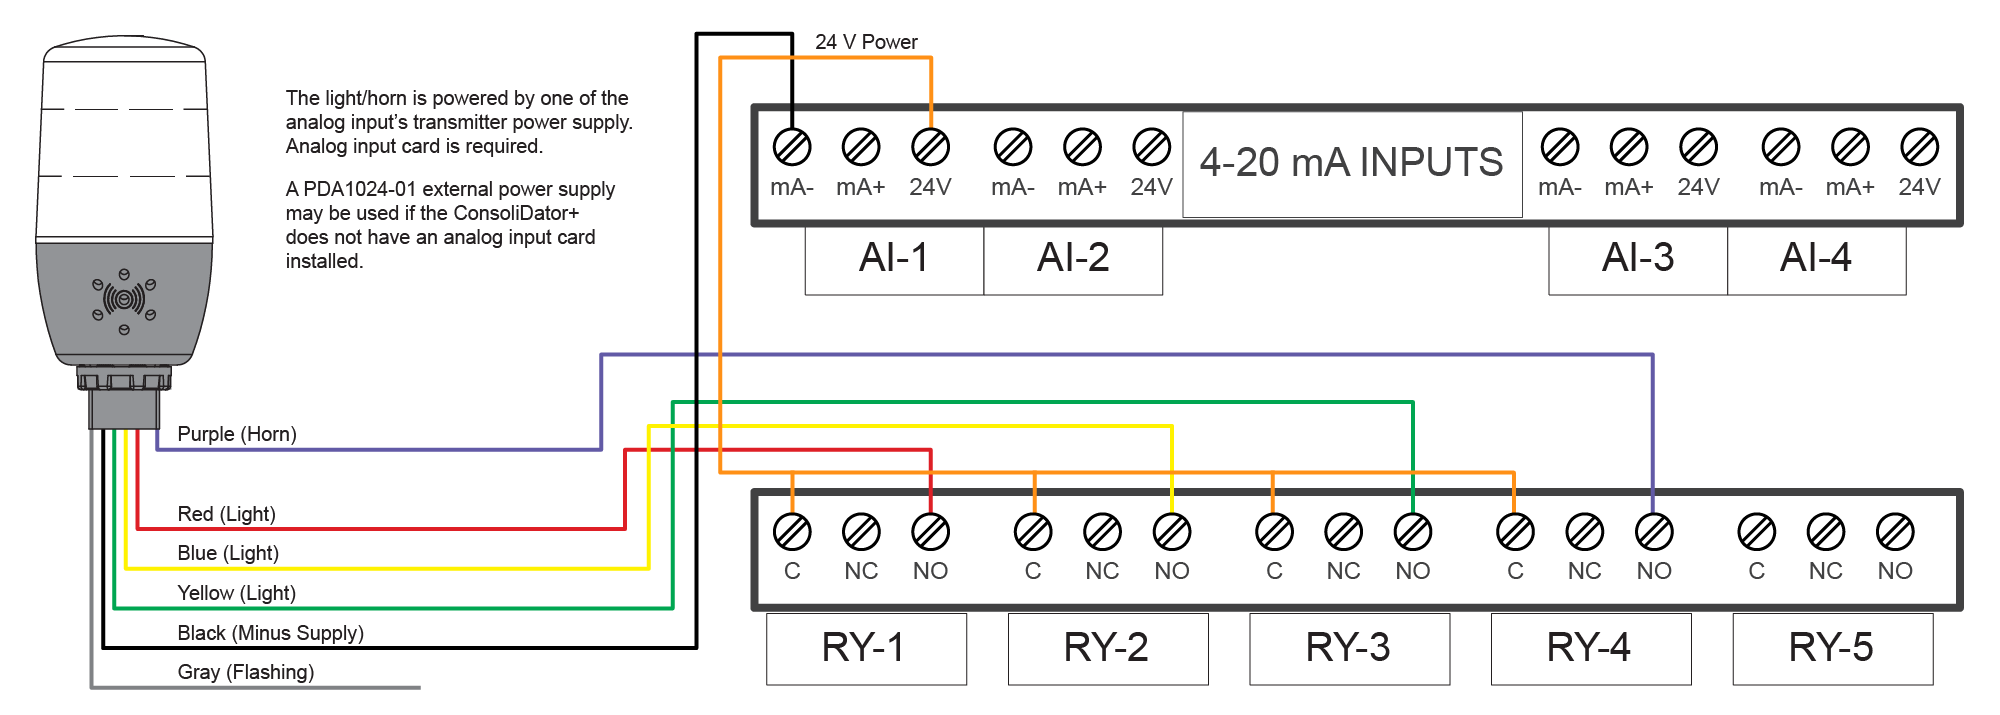 Wiring Connections for PDA-LH3LC-RYG Models Using ConsoliDator+ Controller Internal Power Supply